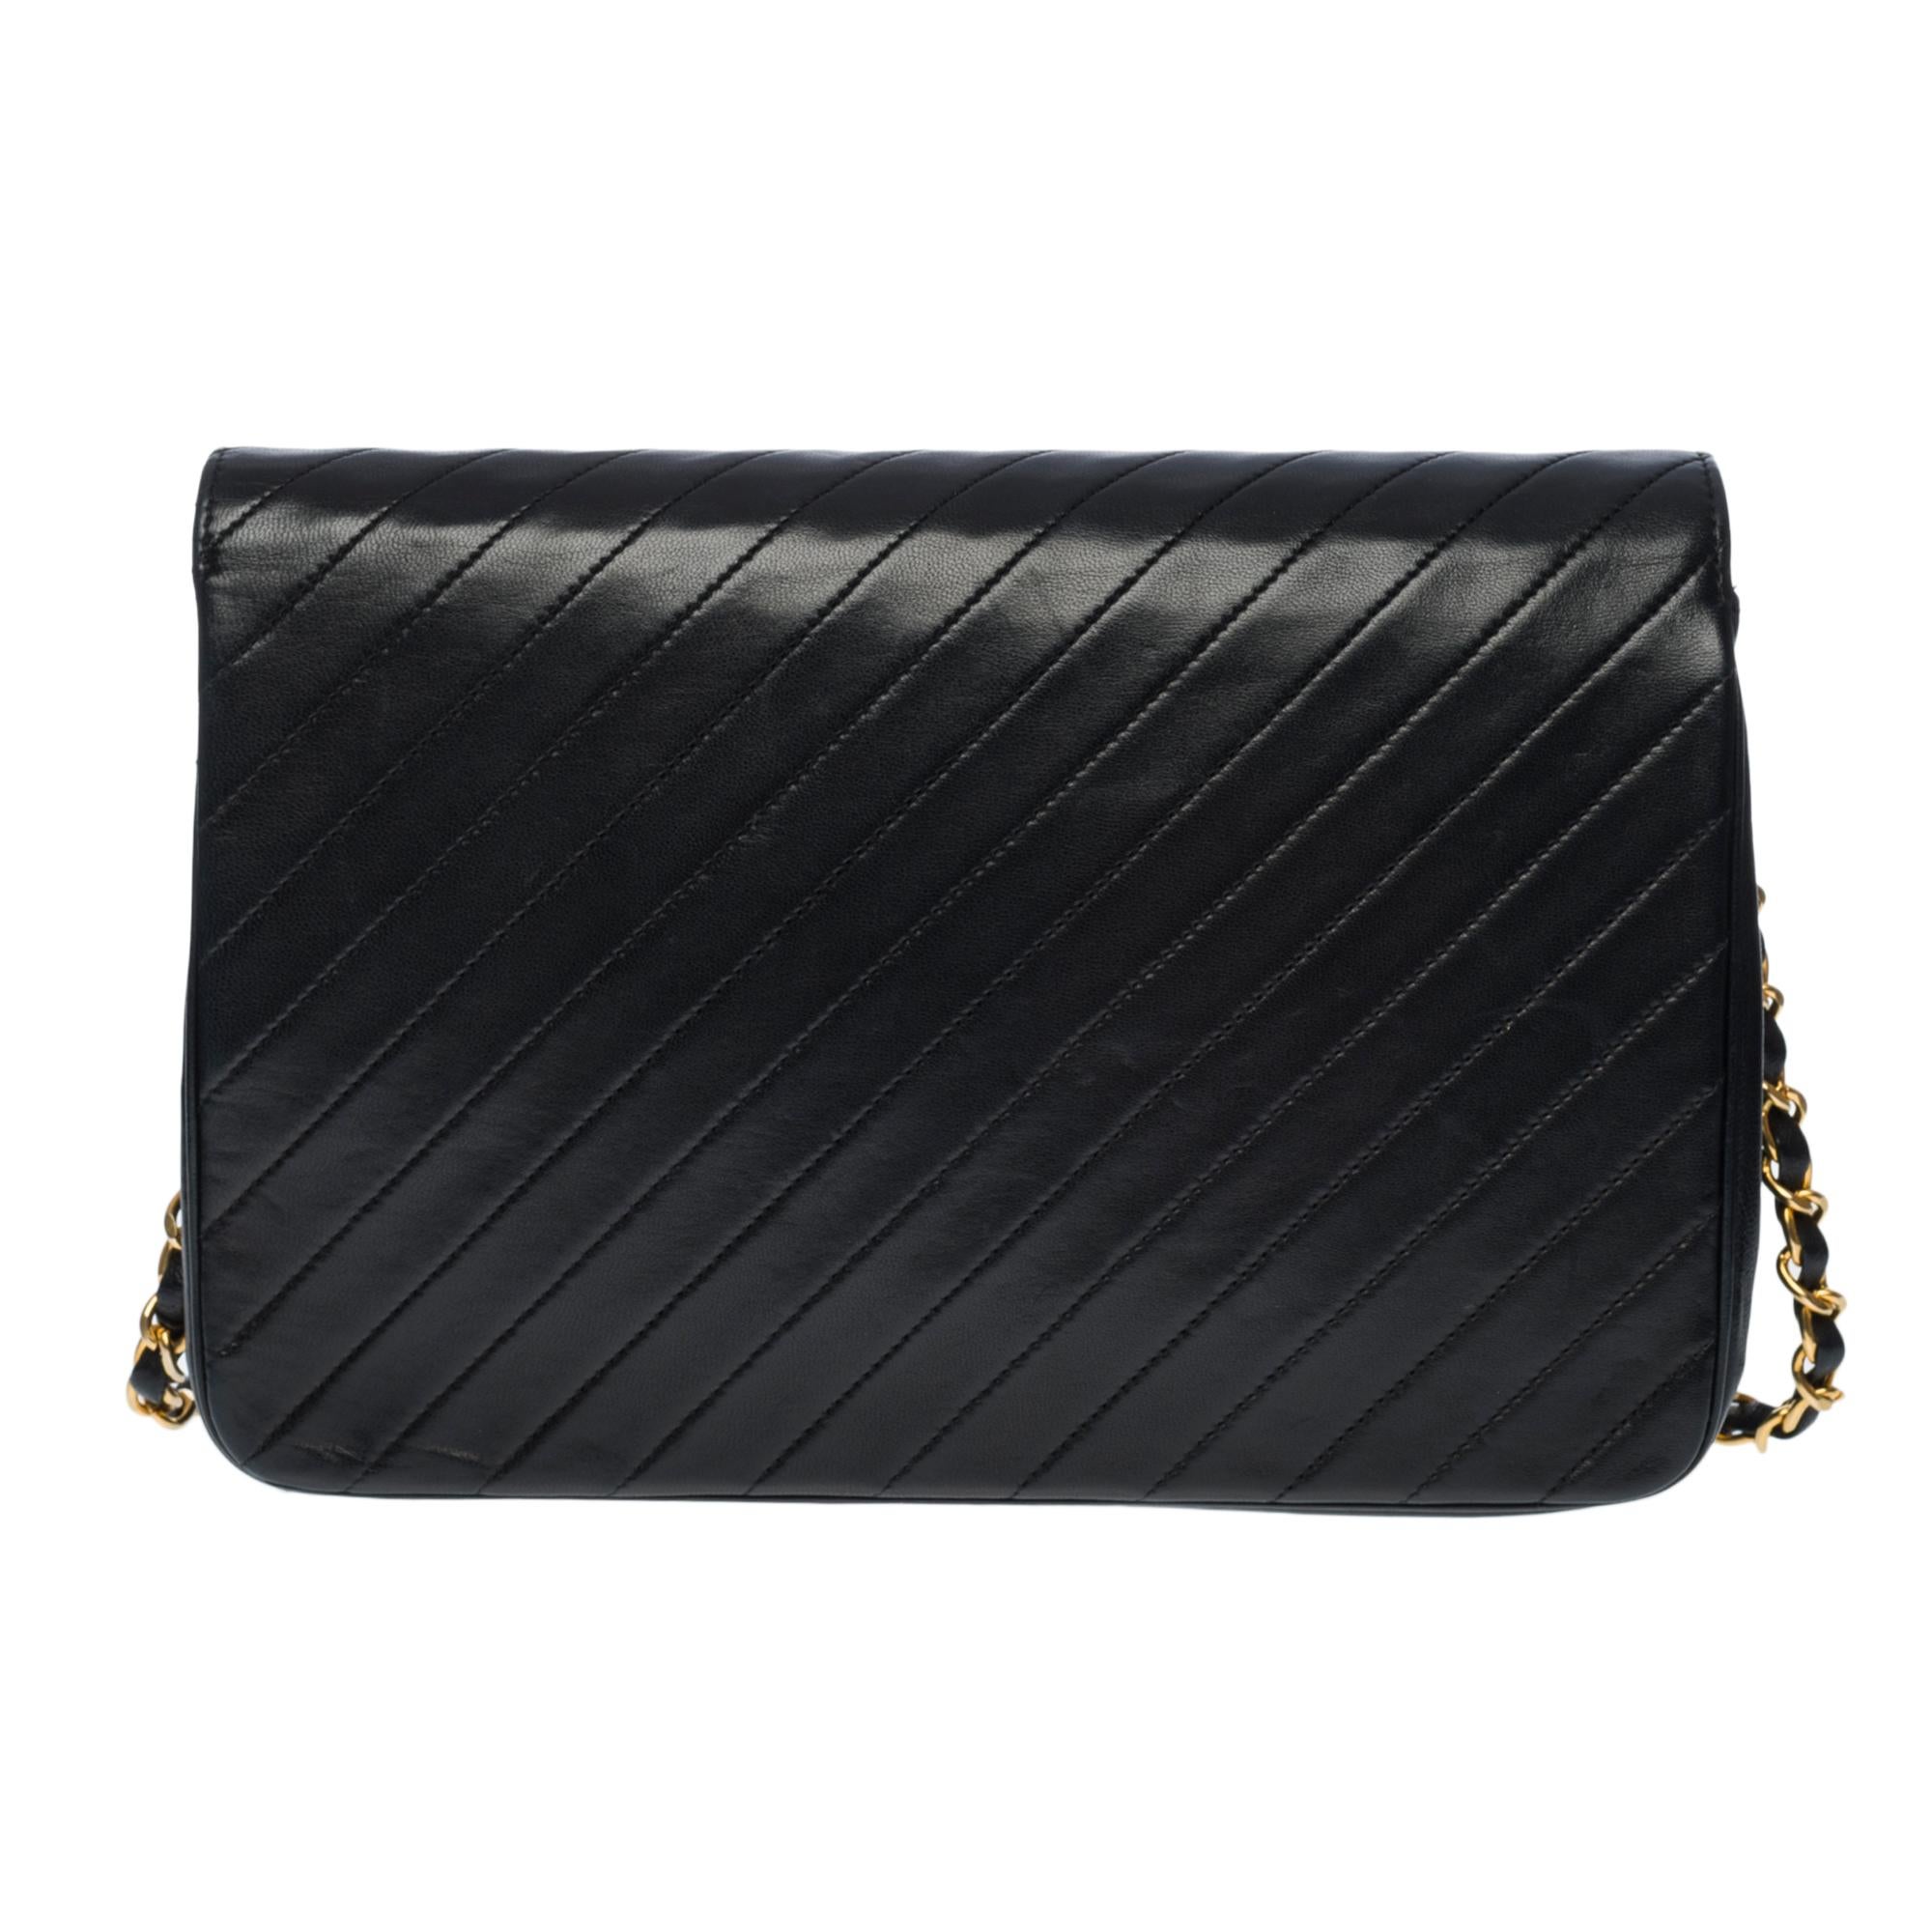 Splendid Chanel Classic shoulder bag in quilted black leather with herringbone, gold-plated metal hardware, a chain-handle in gold-plated metal interlaced with black leather for a shoulder support 

CC closure in gold metal on flap
Inner lining in